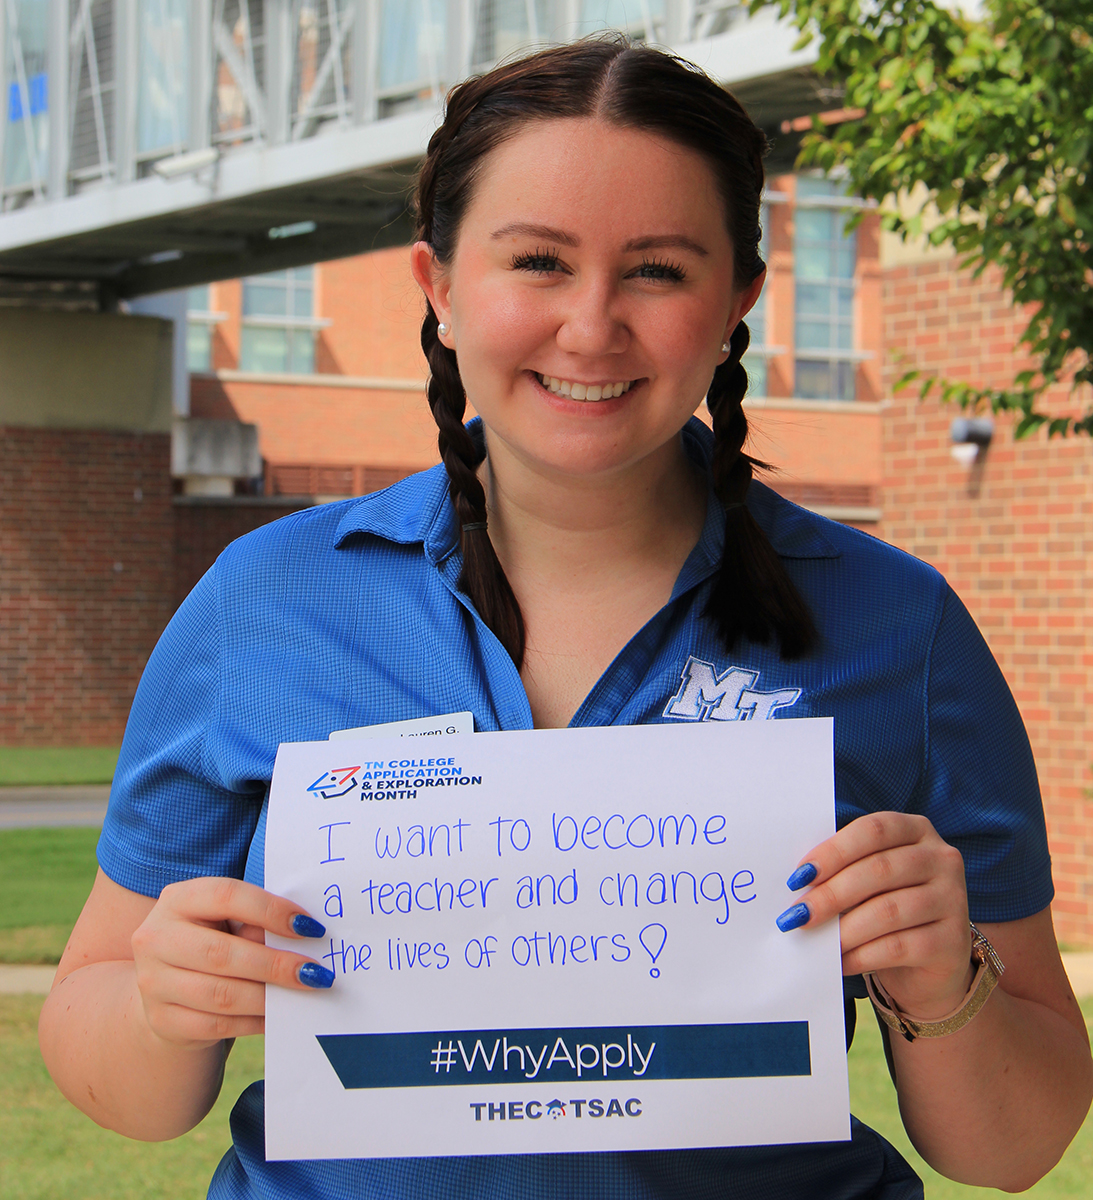 Lauren Goodman, an MTSU junior elementary education major from Murfreesboro, promotes the #WhyApply effort during the fall college application season. MTSU will waive application fees until 11:55 p.m. Sunday, Sept. 26. MTSU staff will assist students attending the Saturday, Sept. 25, True Blue Preview event with the application process — and waive the application fee. (MTSU photo by Katie Roberts)